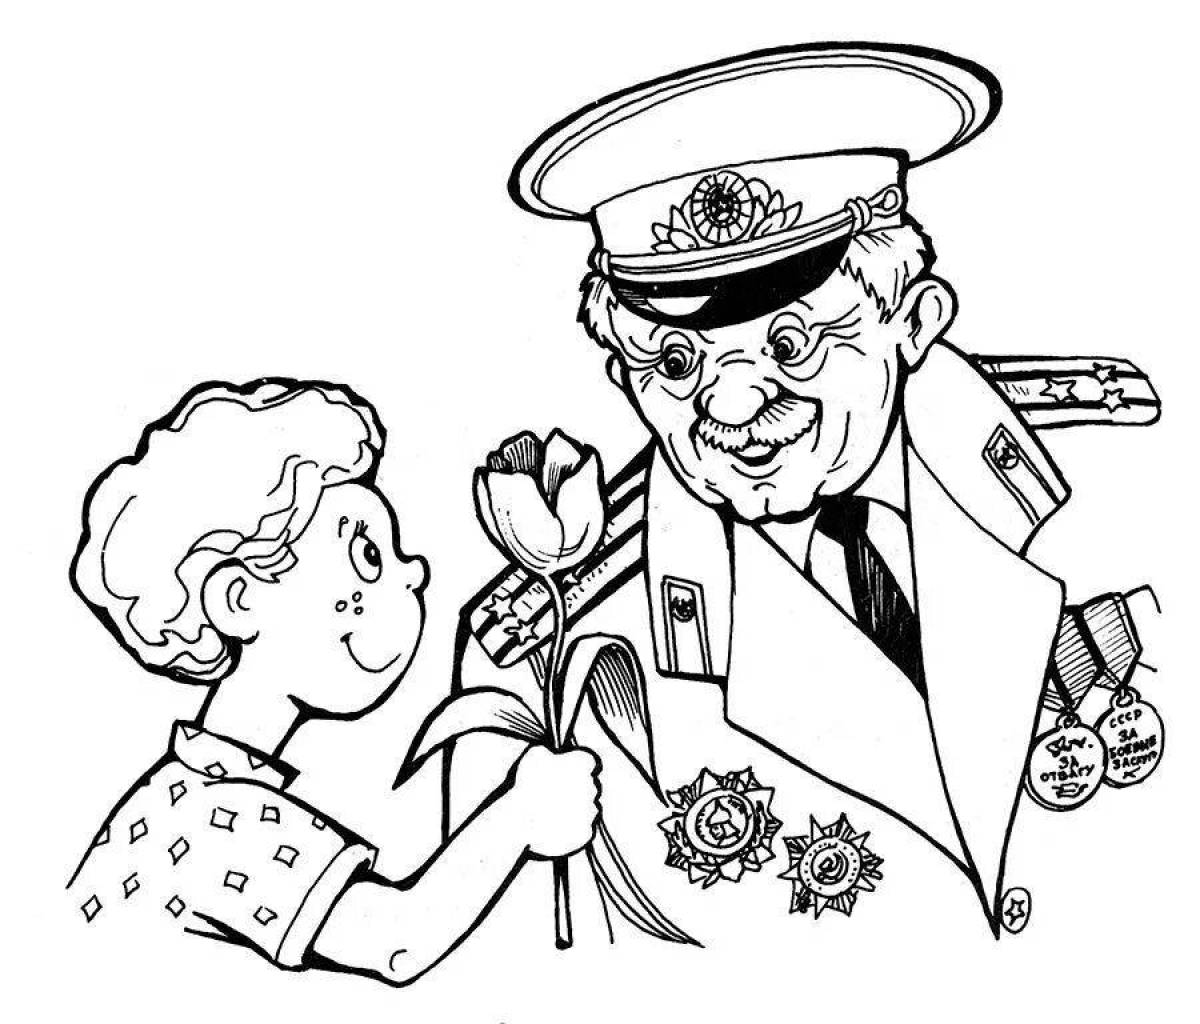 Winning shiny coloring page